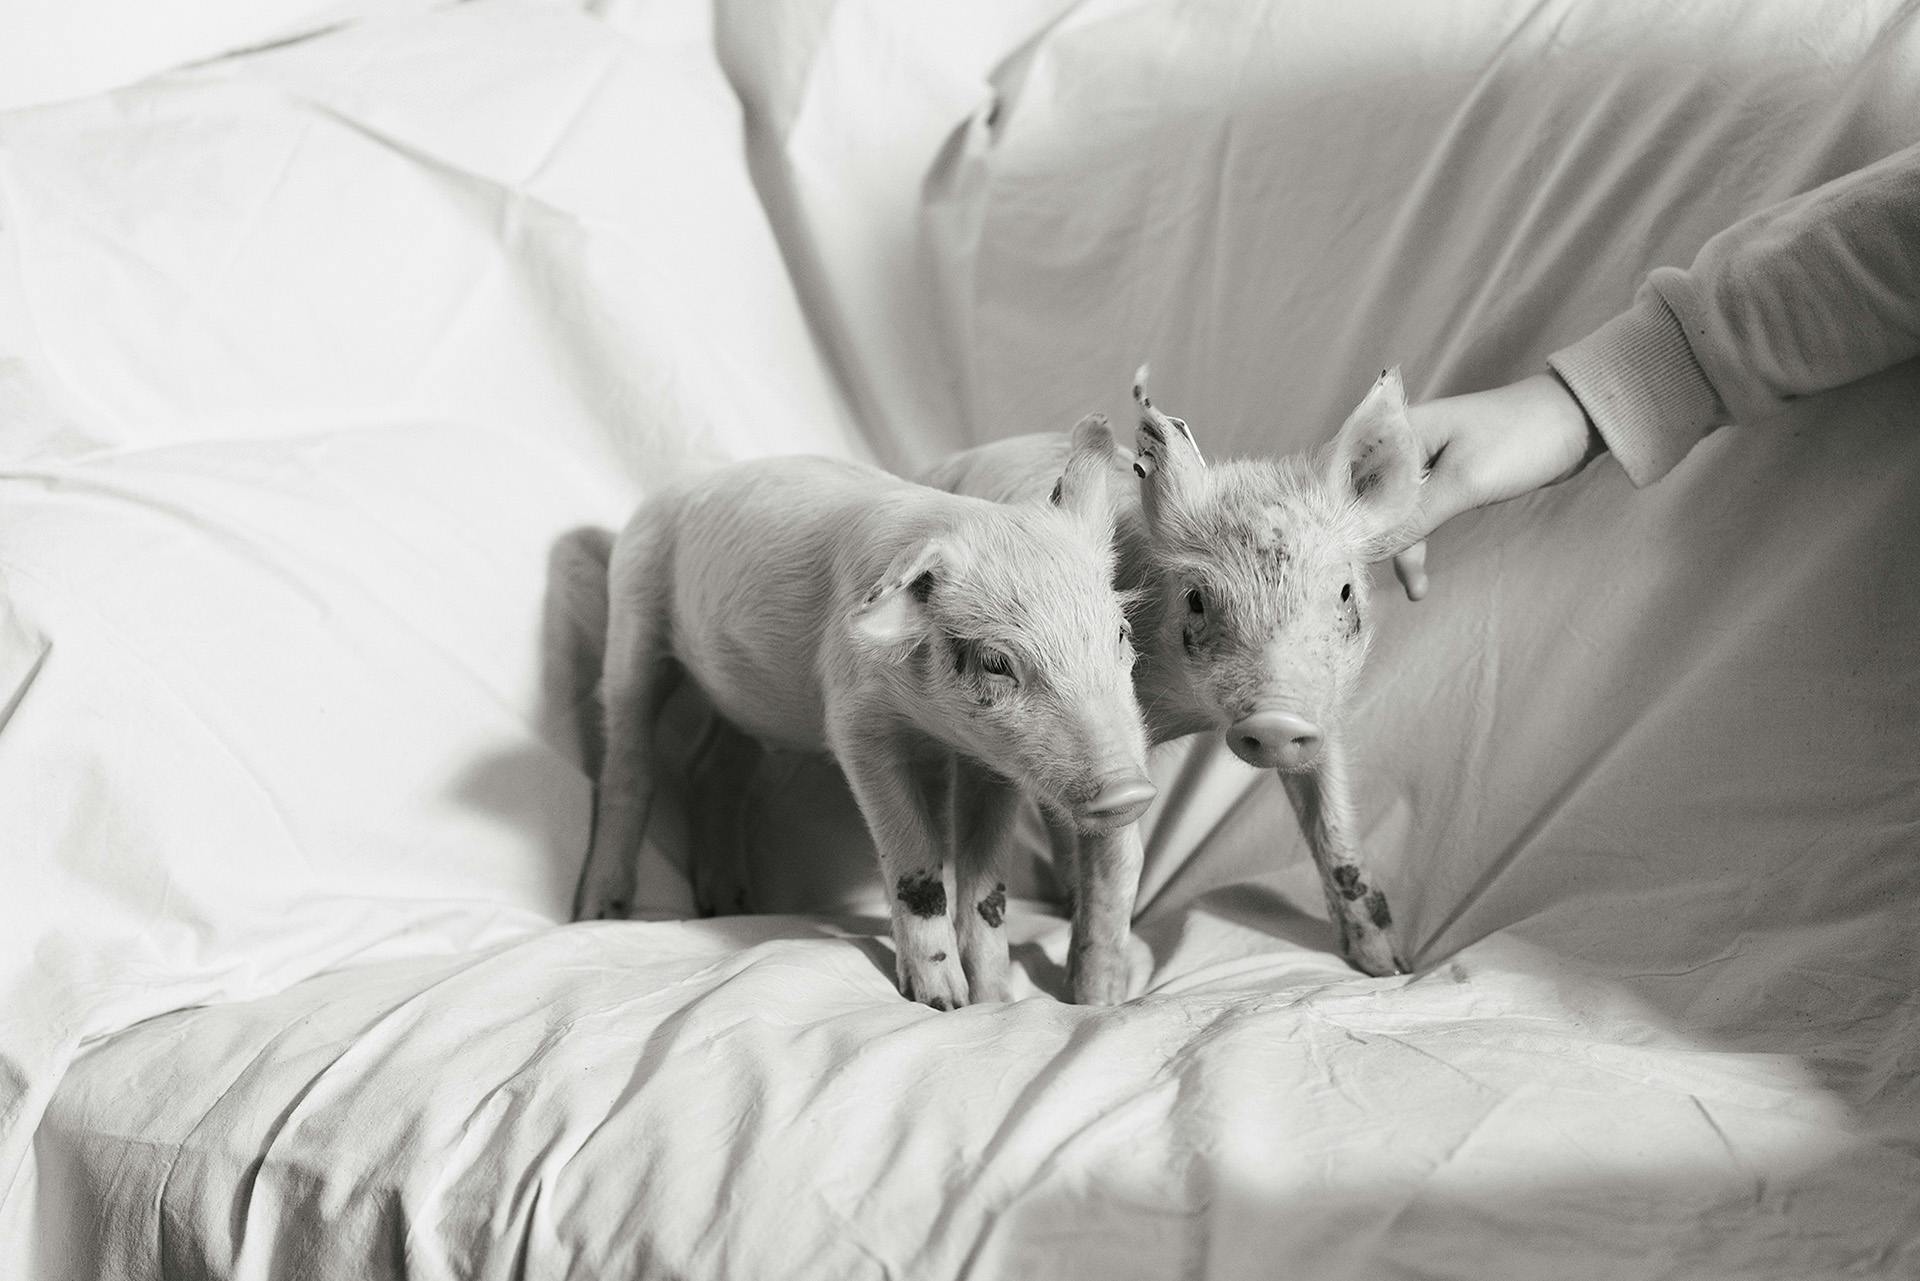 Black and white photograph of two piglets stood on pale material, taken from Yana Wernicke's book Companions